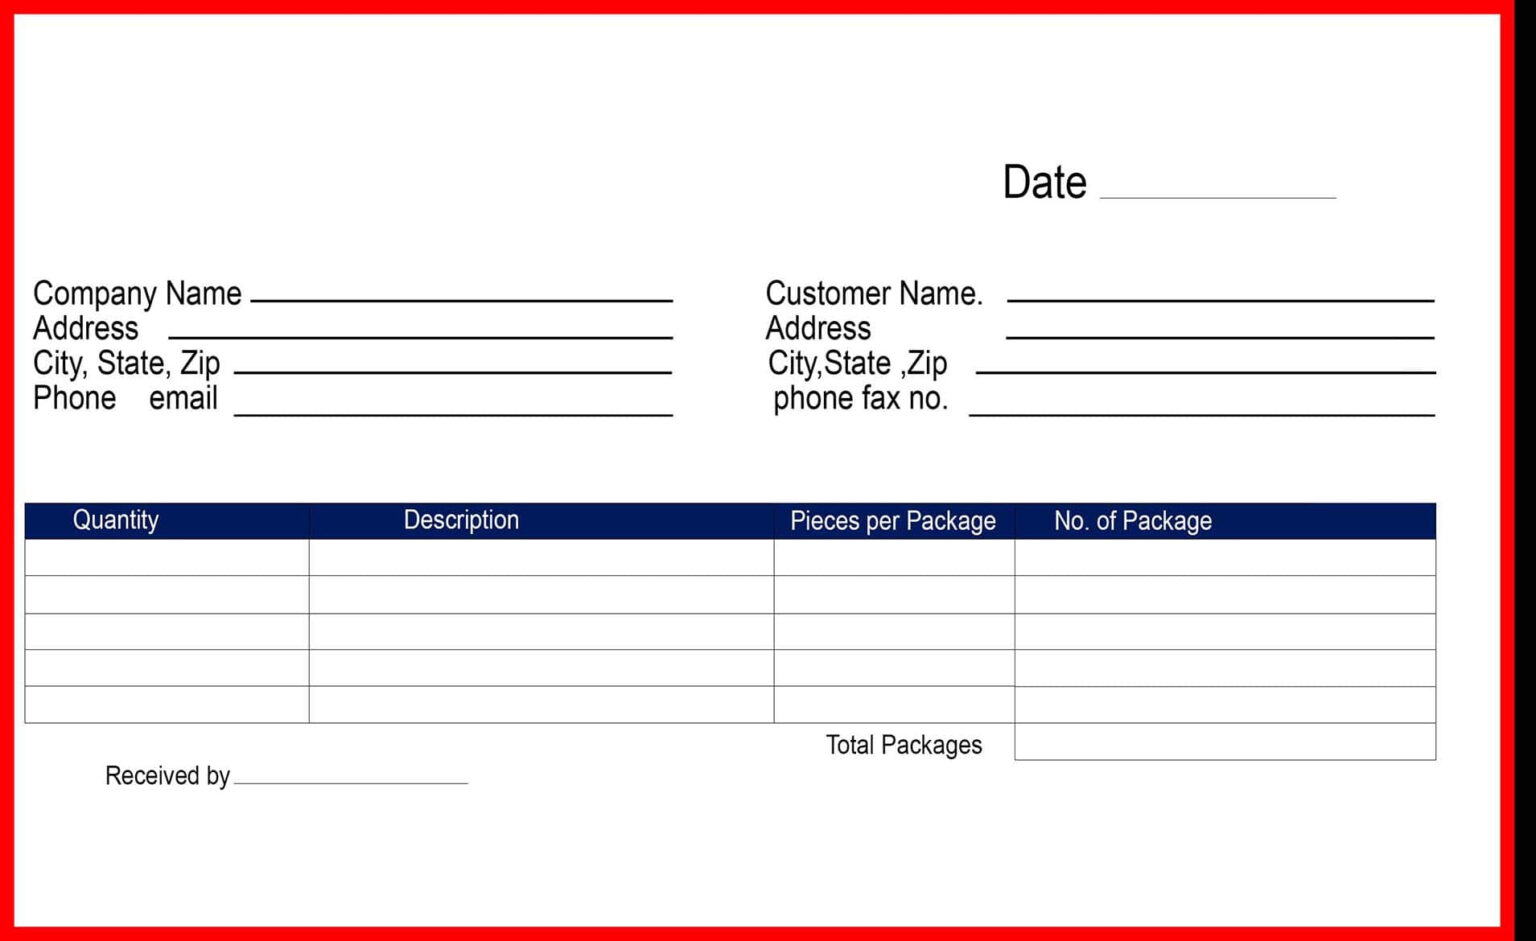 free-delivery-receipt-template-pdf-word-doc-excel-the-throughout-proof-of-delivery